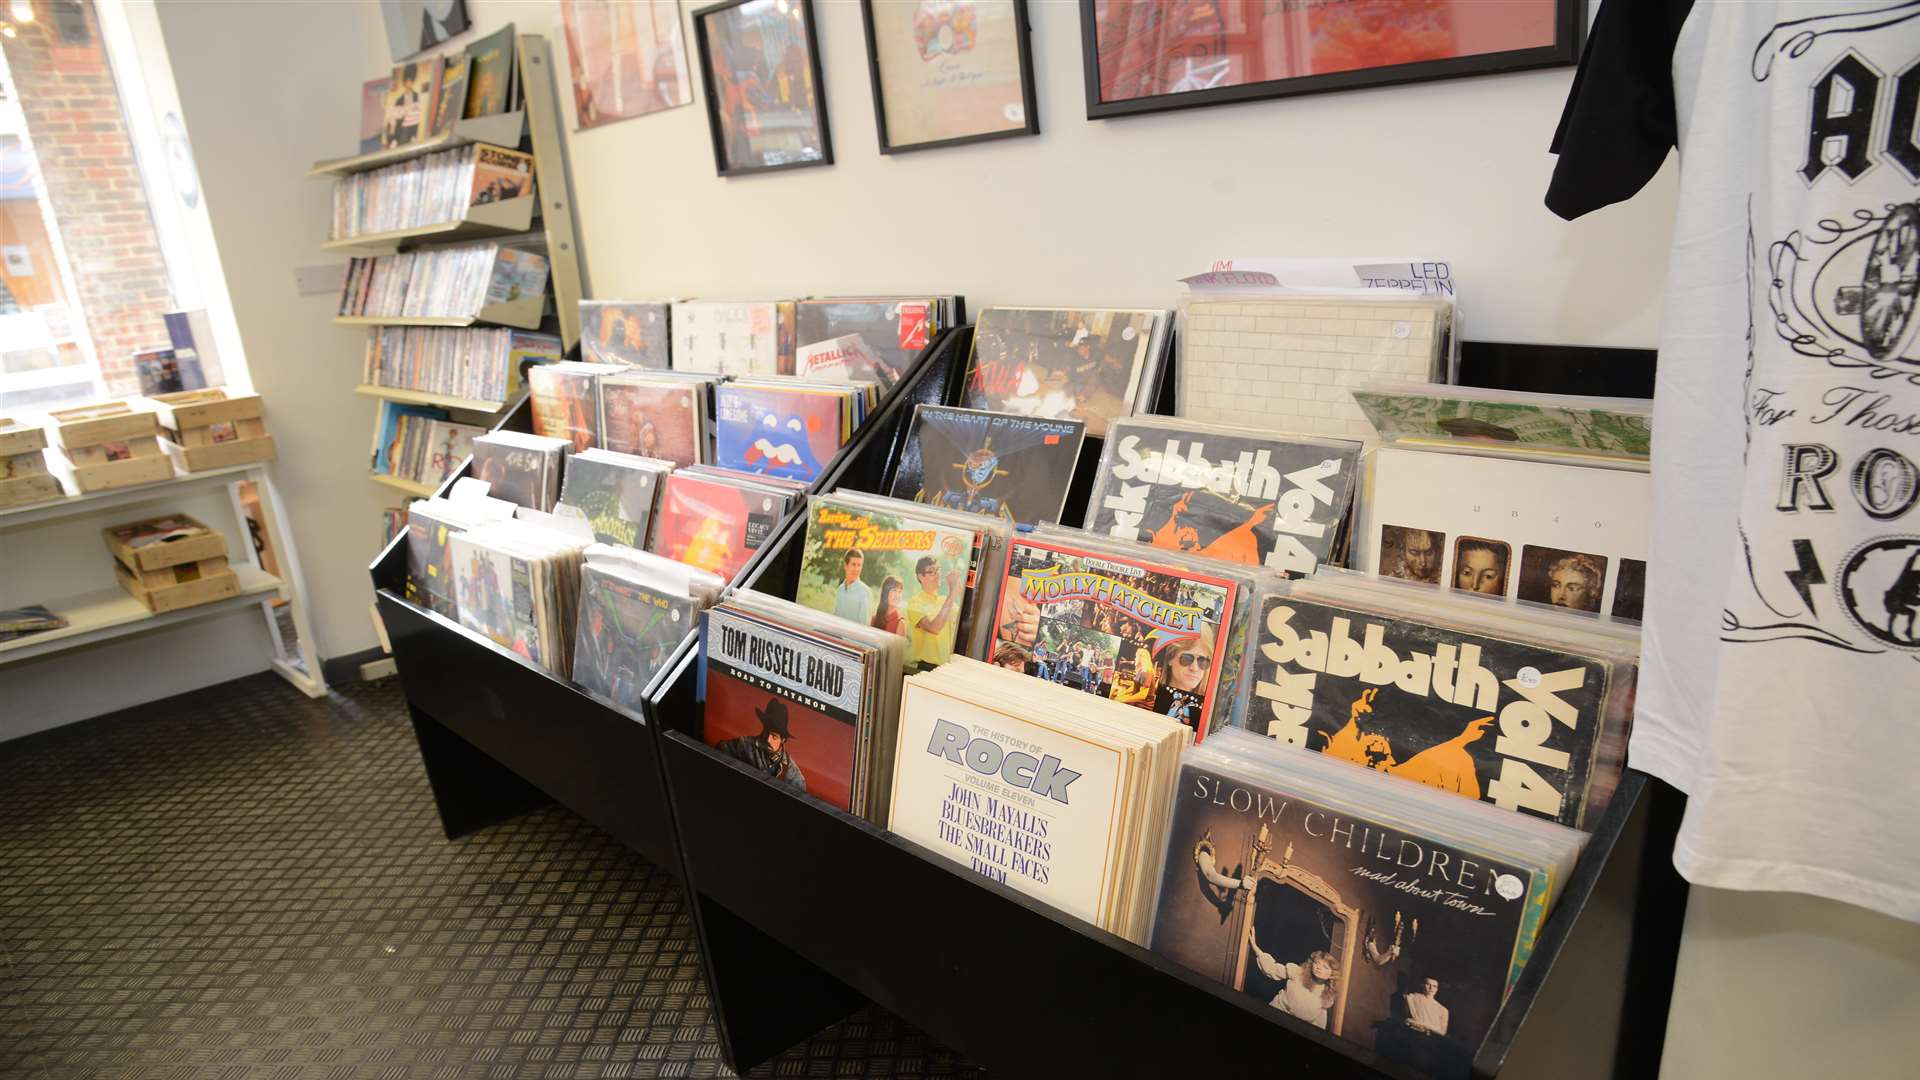 The Record Store sells and buys used vinyl